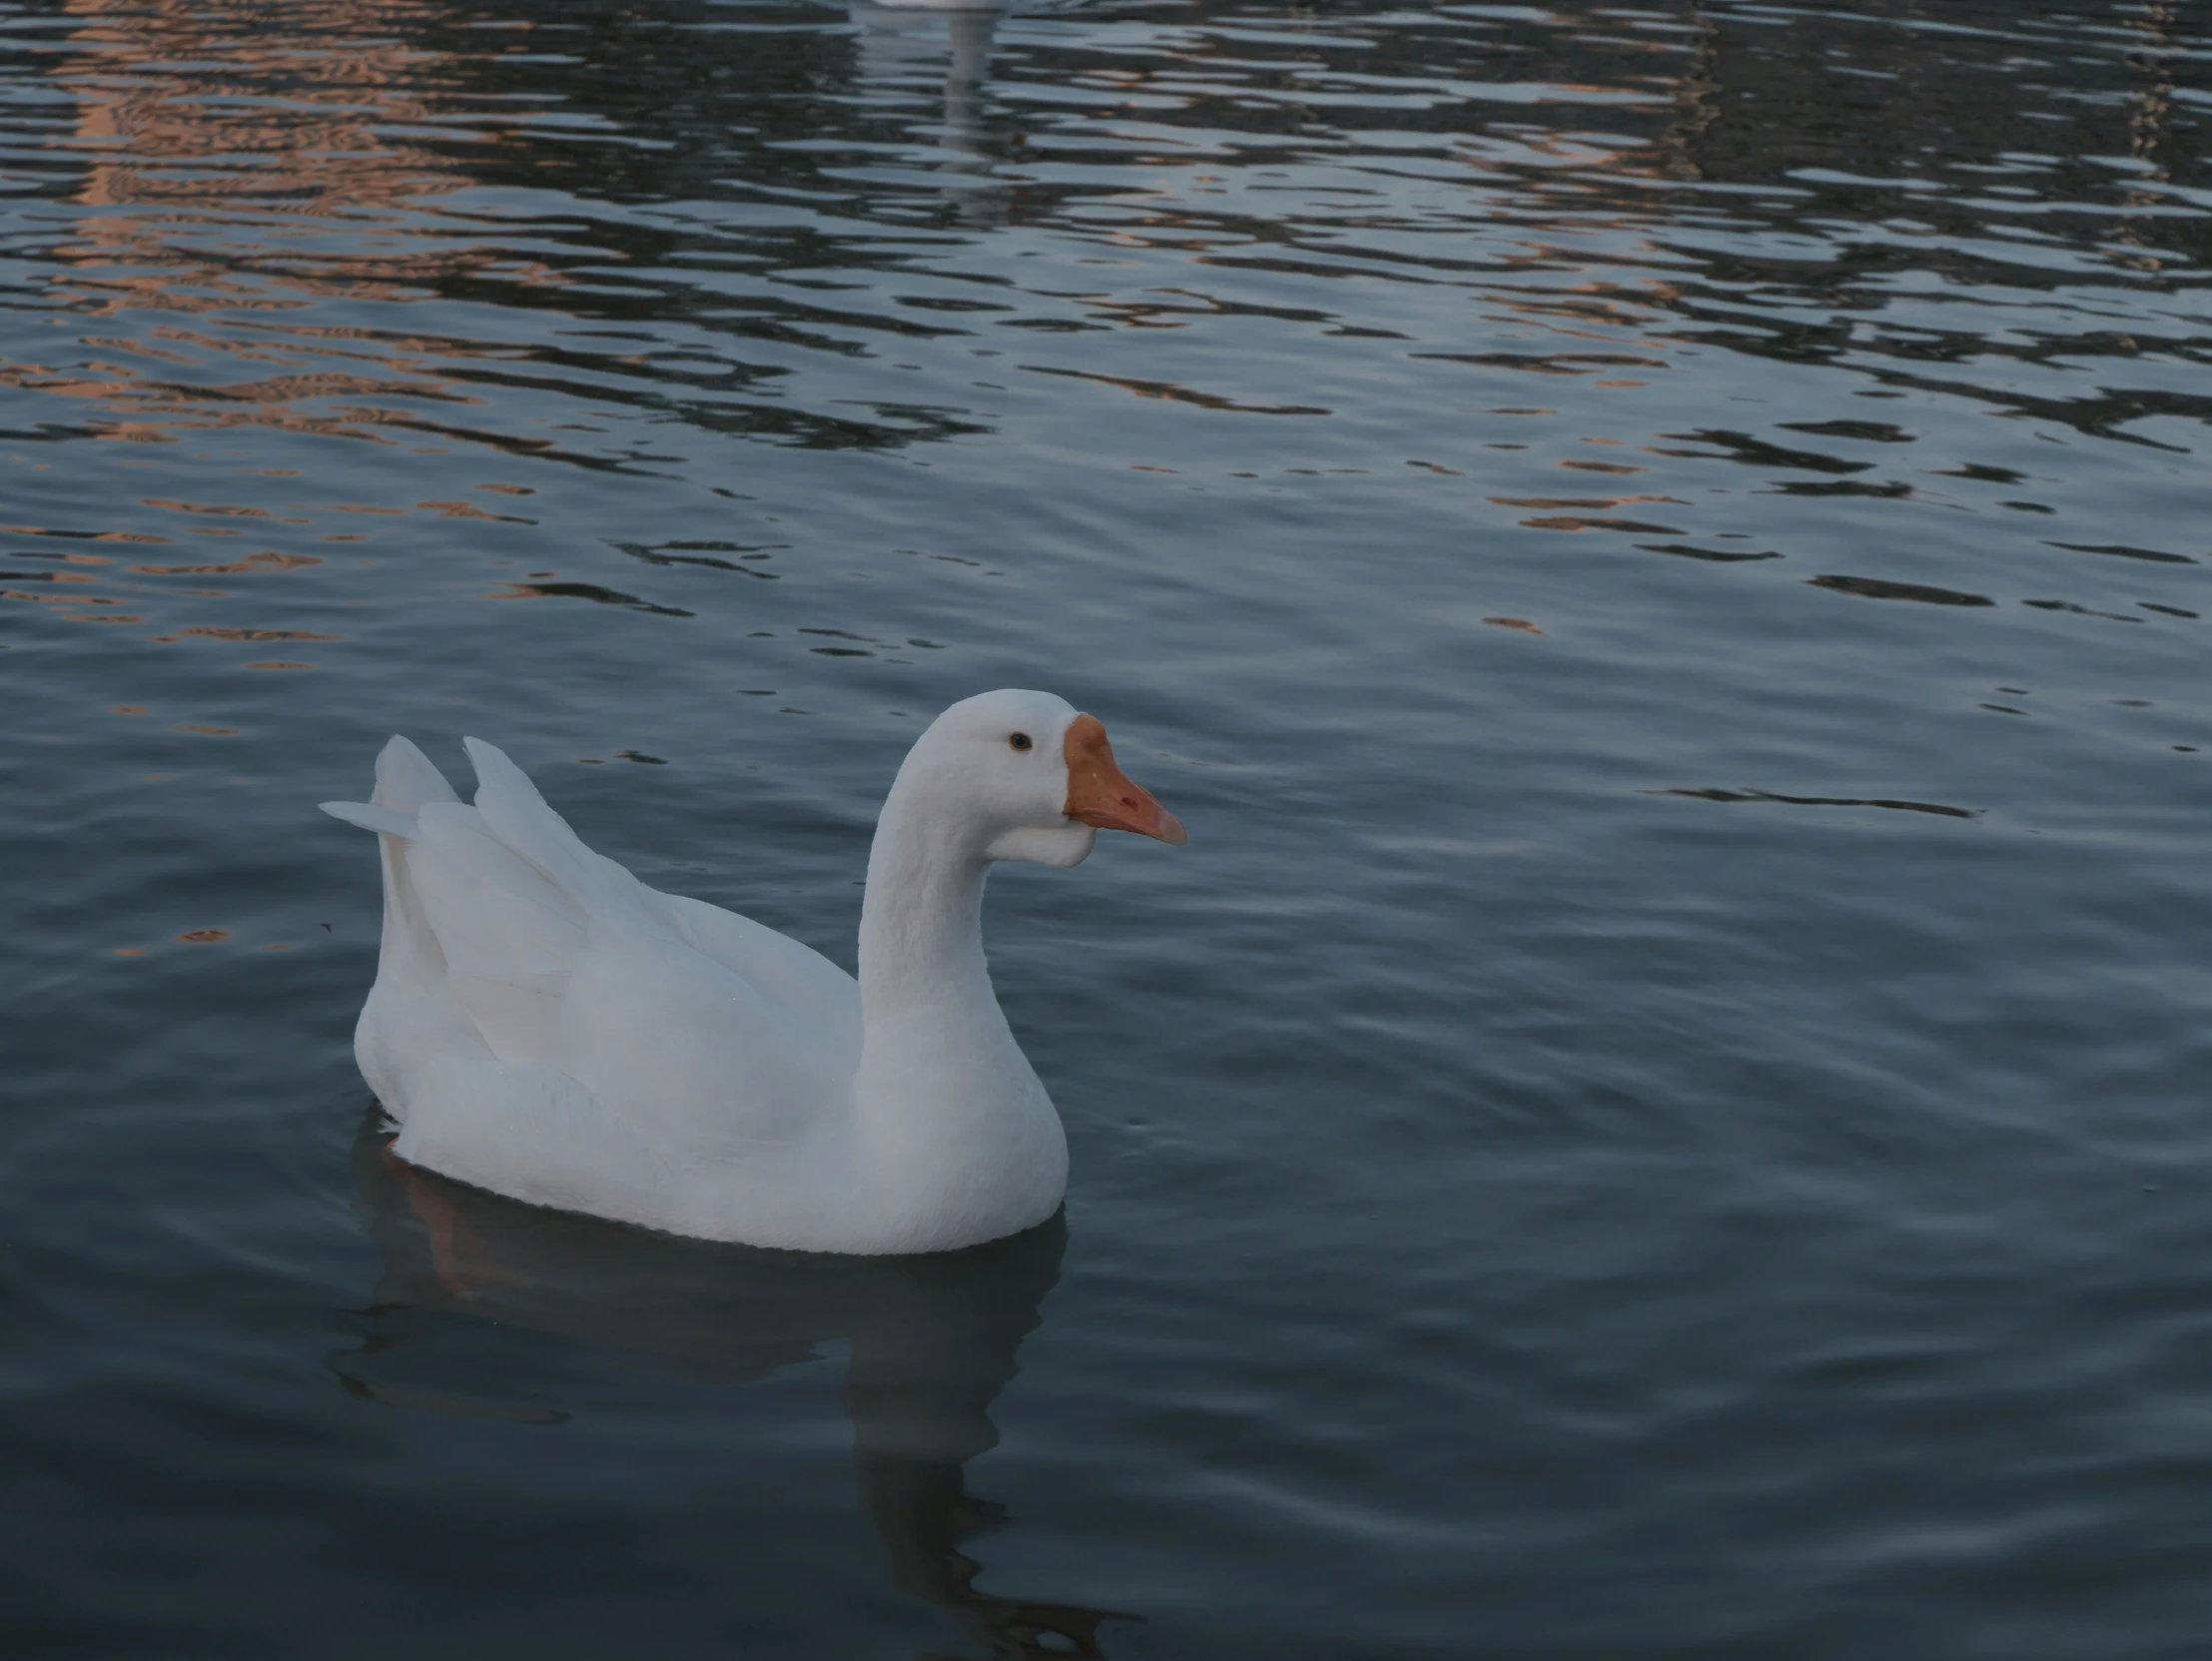 a large duck floating on top of a lake